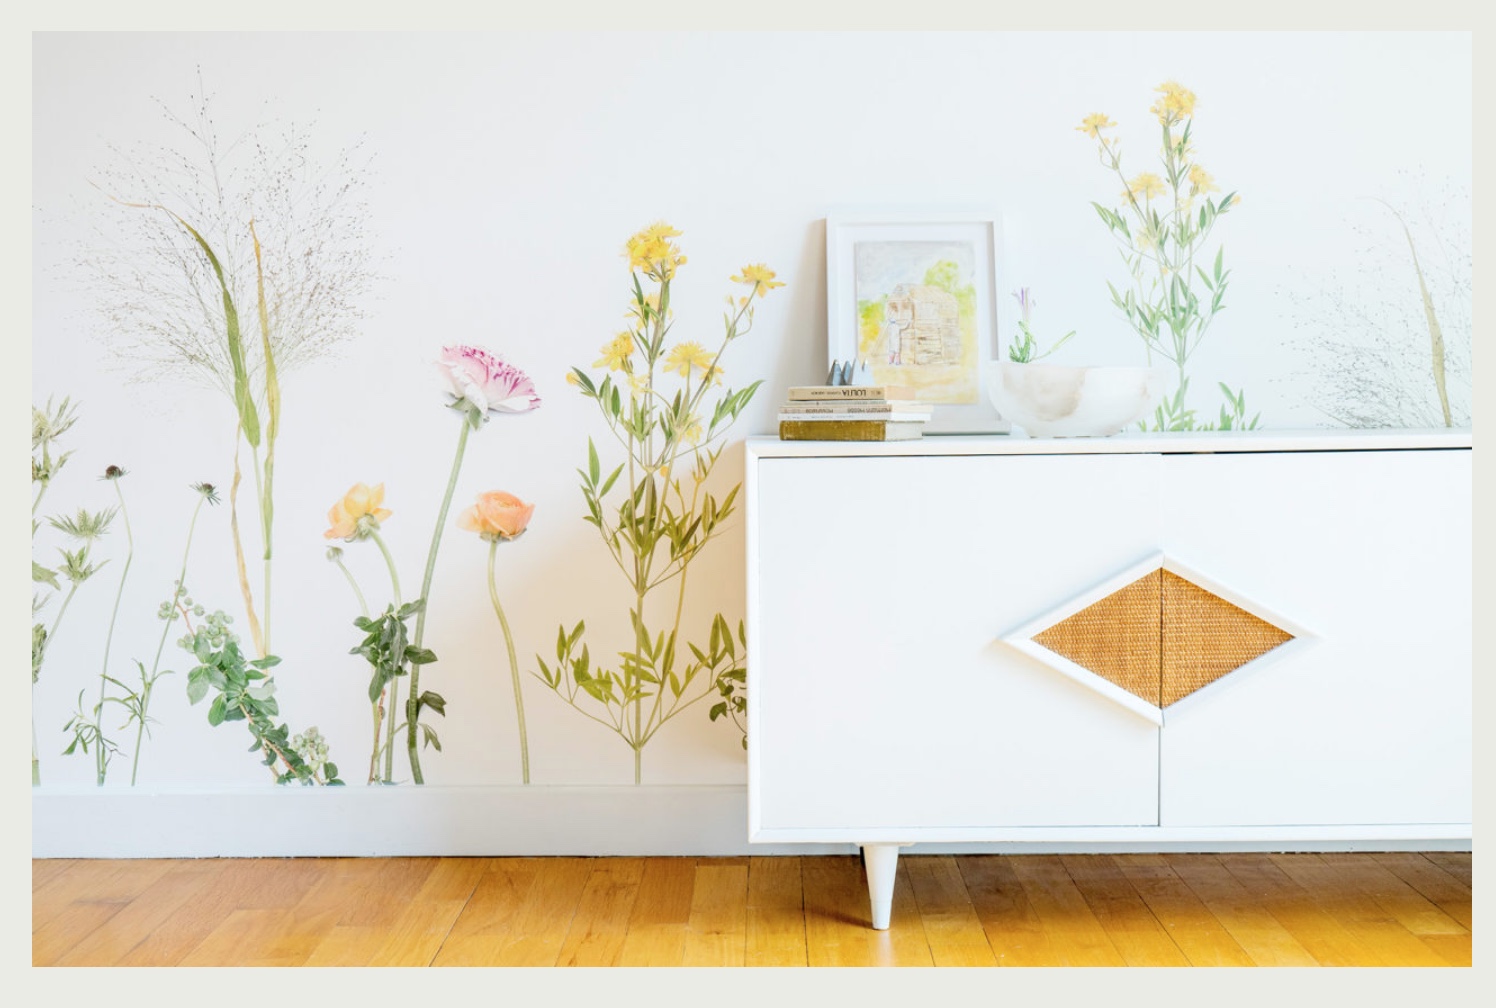 Calico Wallpaper Flora pattern with white bureau in front